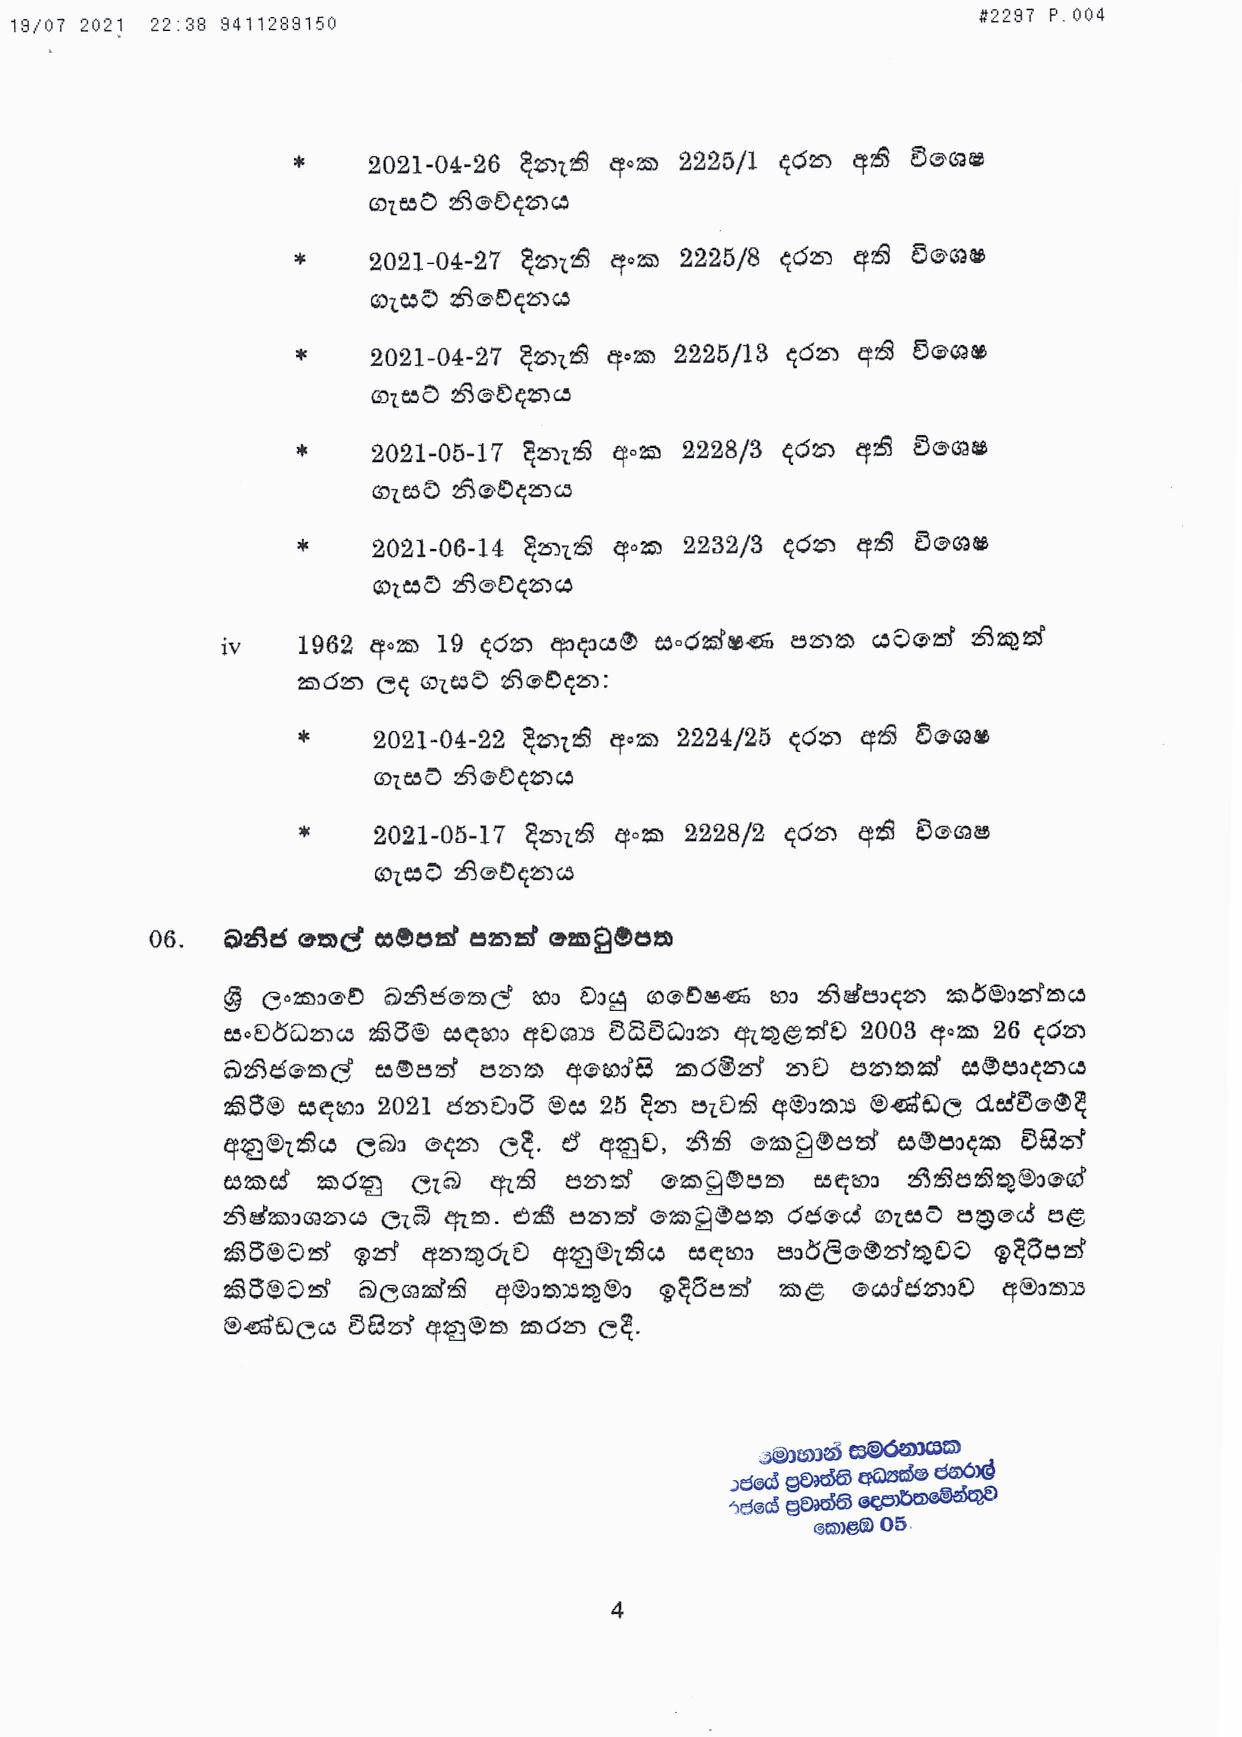 Cabinet decision on 19.07.2021 Sinhala page 004